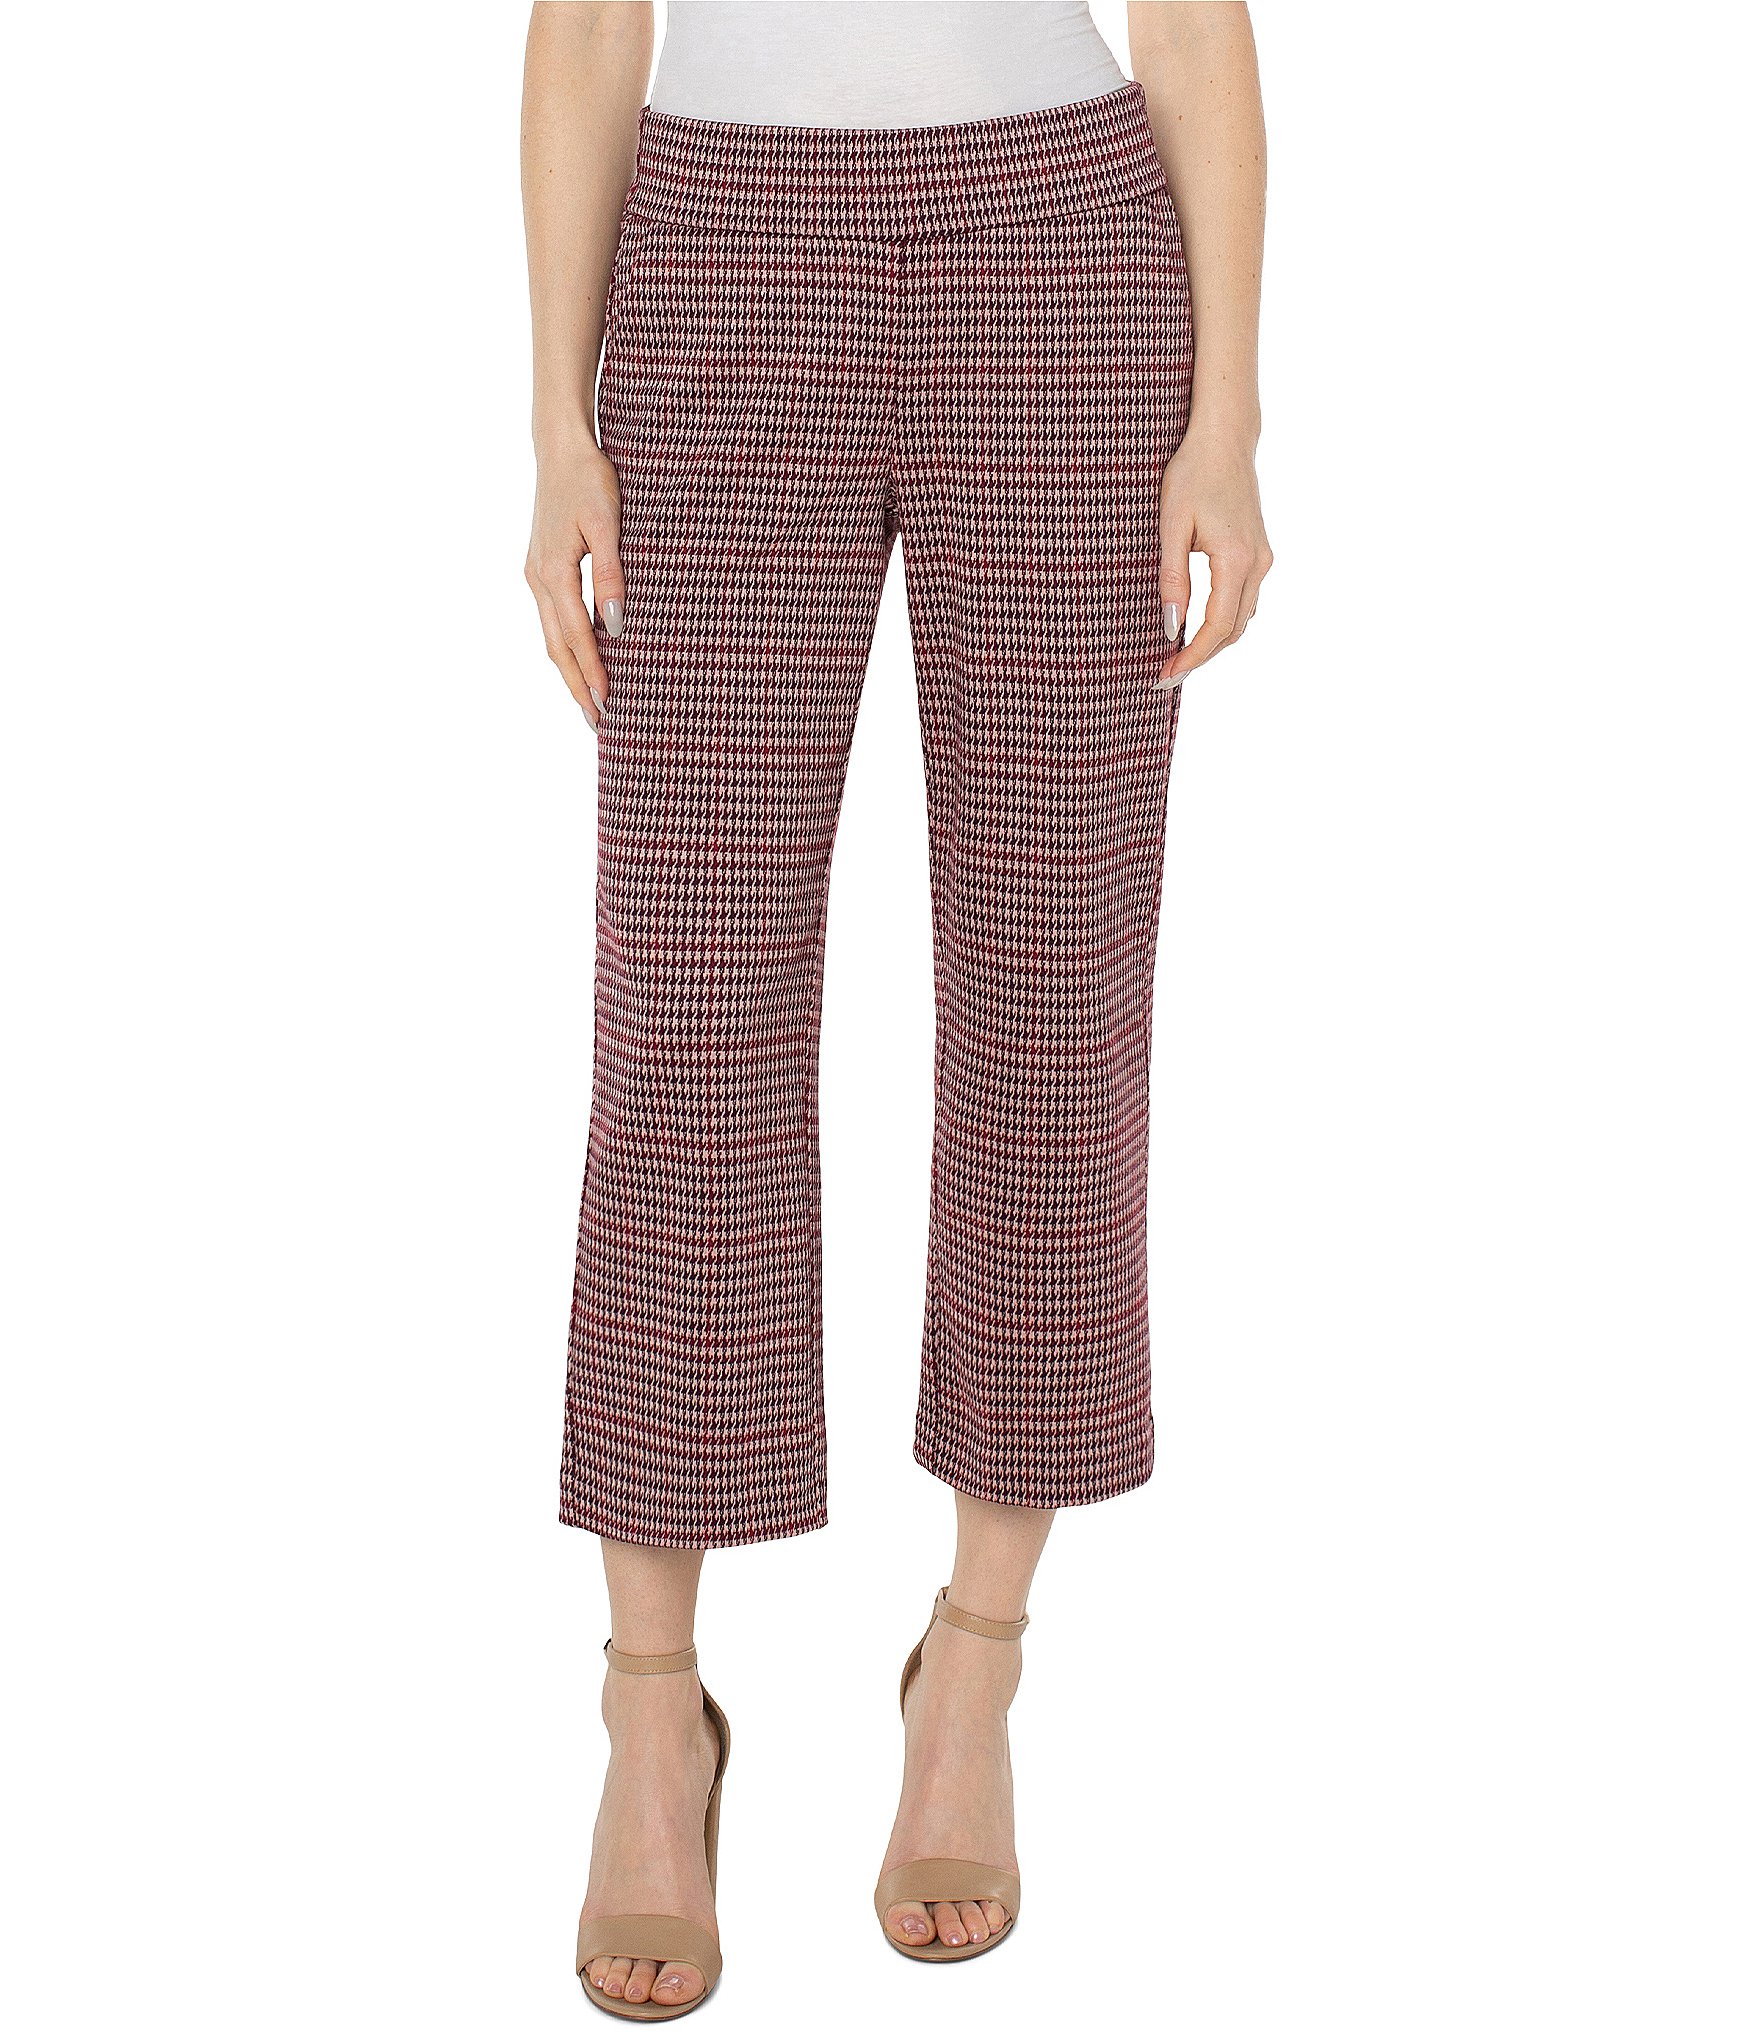 Houndstooth Pants for Women High Waist Button Straight Leg Office Lounge  Pants Plus Size Plaid Print Pull On Trousers